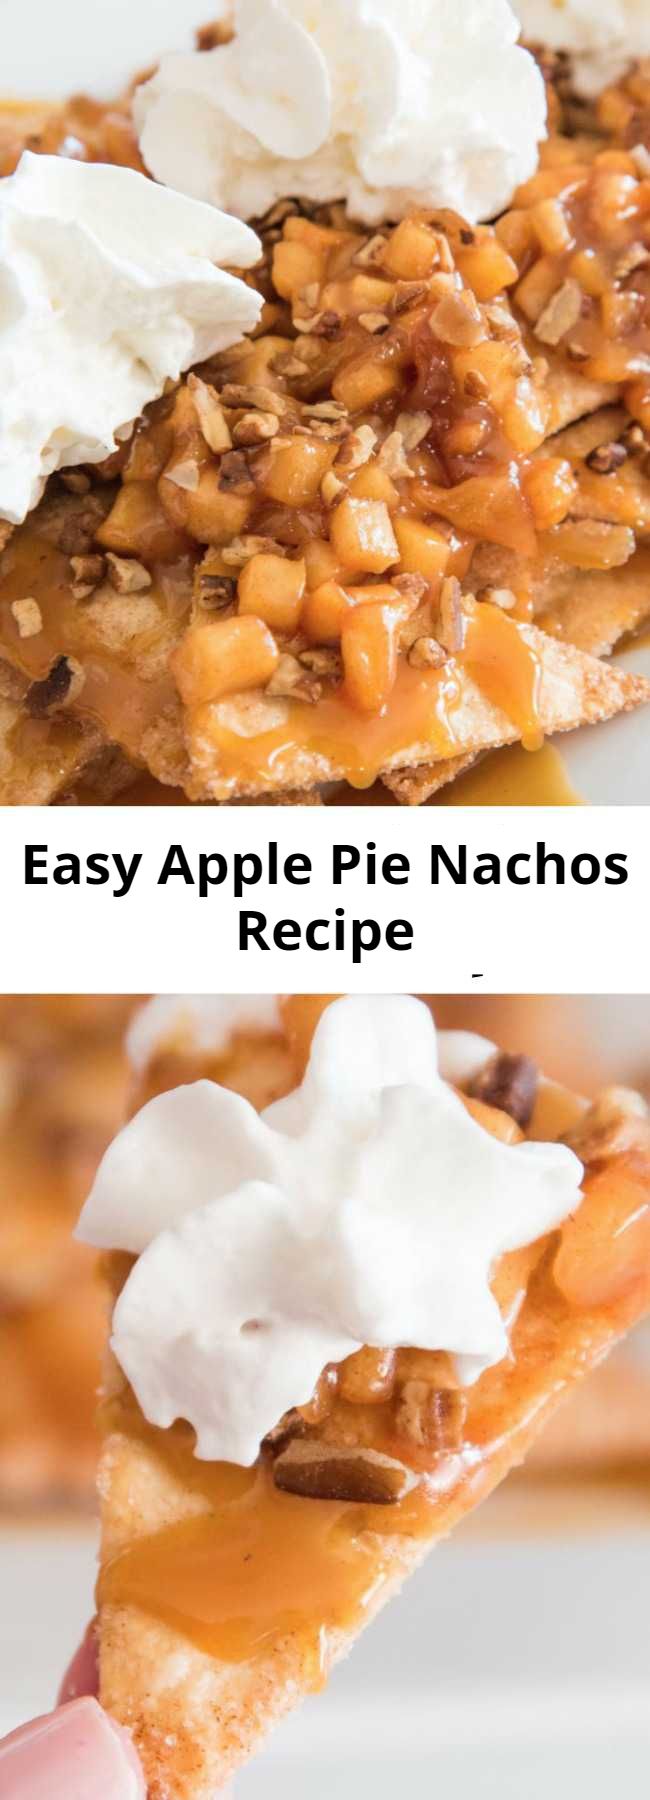 Easy Apple Pie Nachos Recipe - Easy Baked Apple Pie Nachos – delicious cinnamon sugary apple filling on warm, crispy and sweet nachos, topped with pecans, drizzled with caramel sauce, and then topped with whipped cream! The easiest dessert that comes together in no time. It’s the perfect way to serve apple pie to a crowd! Quick and easy recipe. An irresistible party dessert!